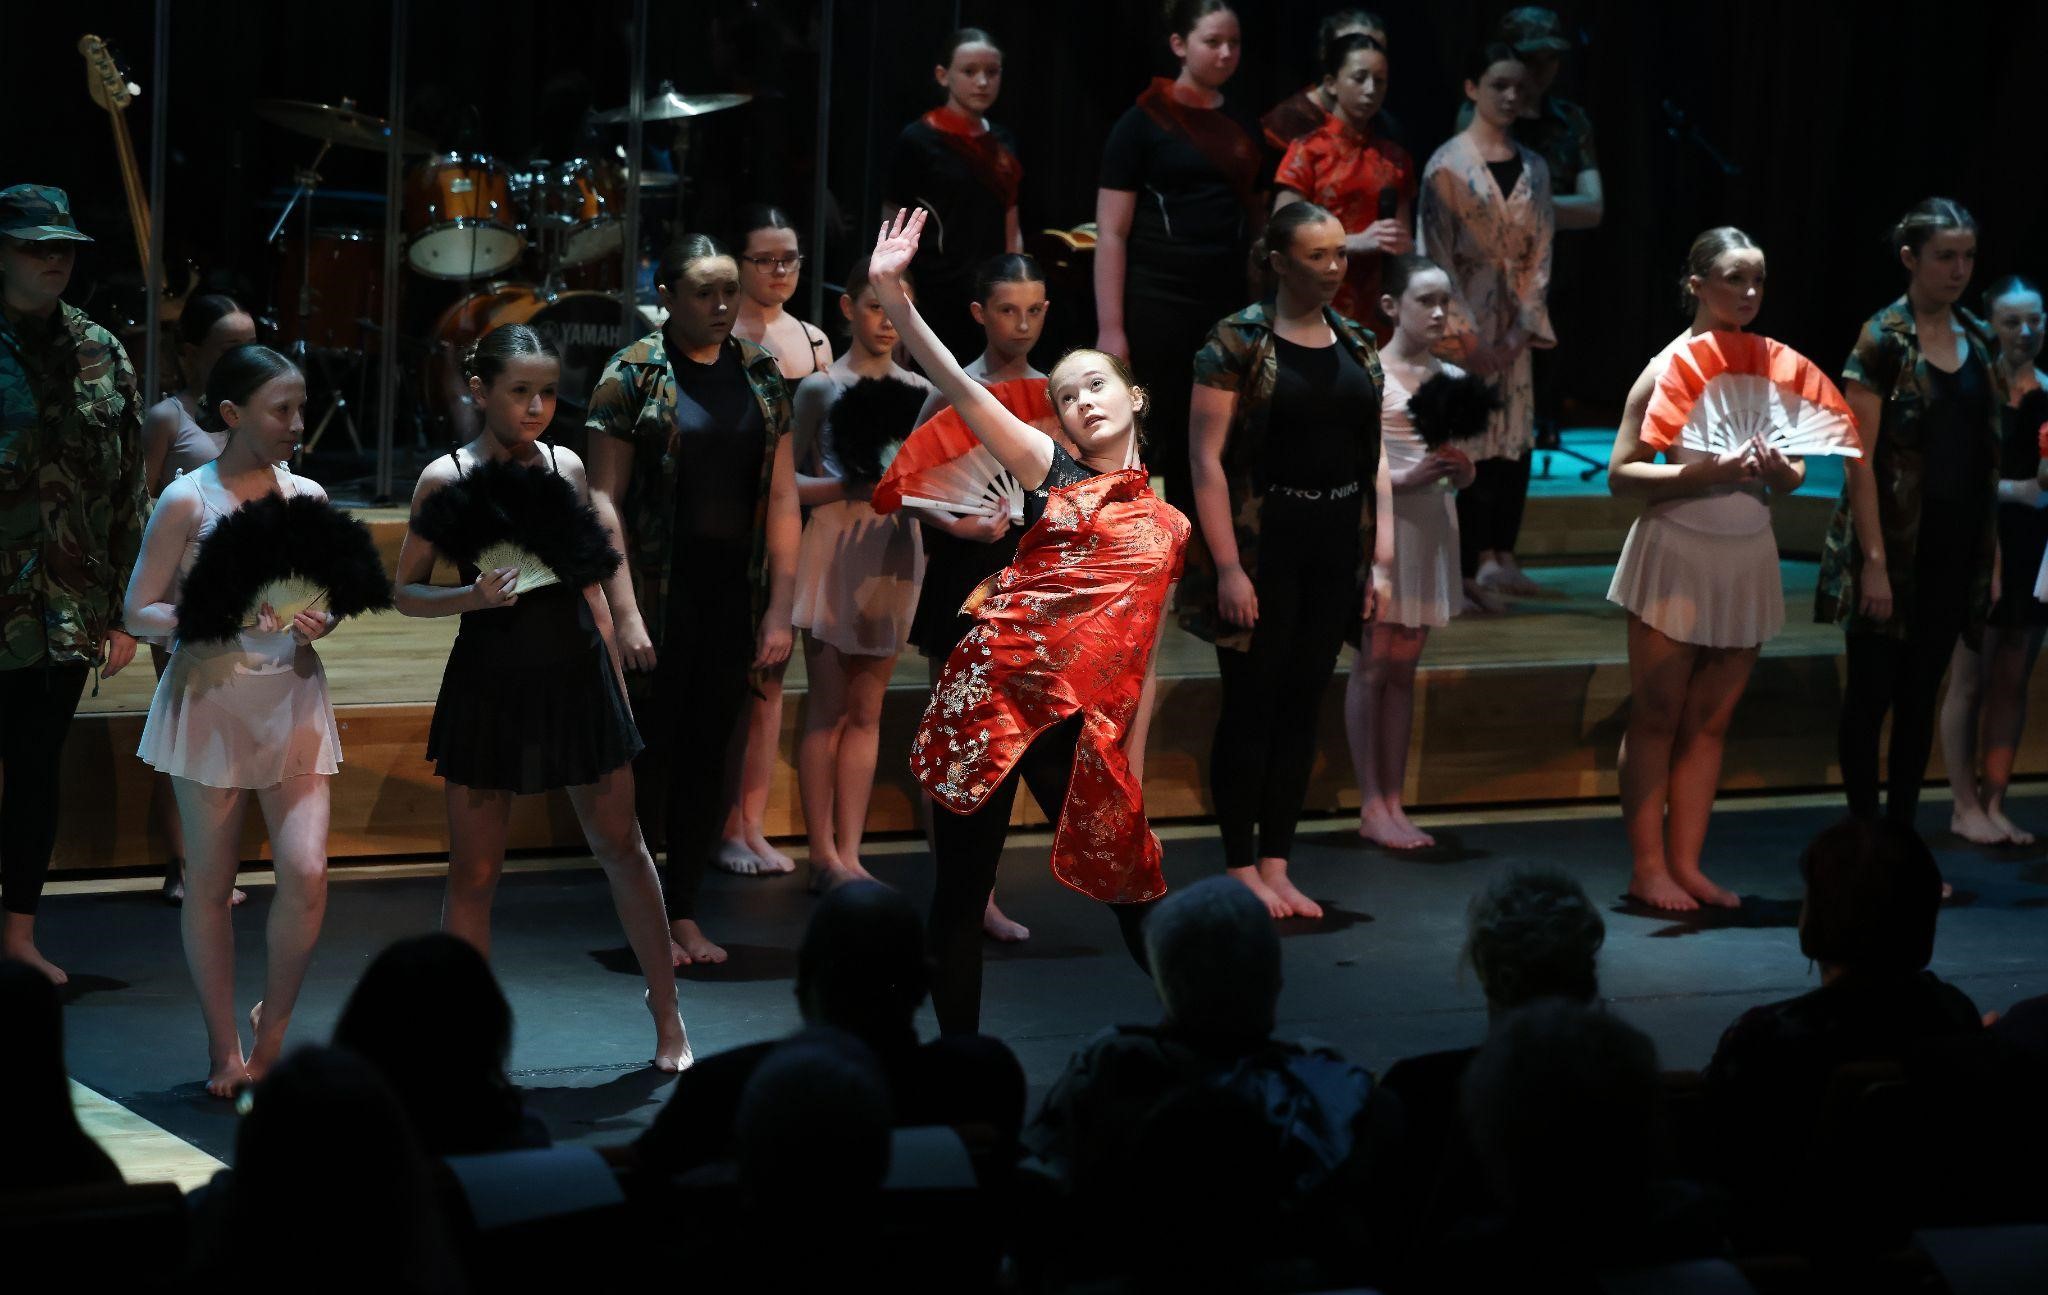 The students of St Julie’s Catholic High School perform the legend of Hua Mulan through ballet. 